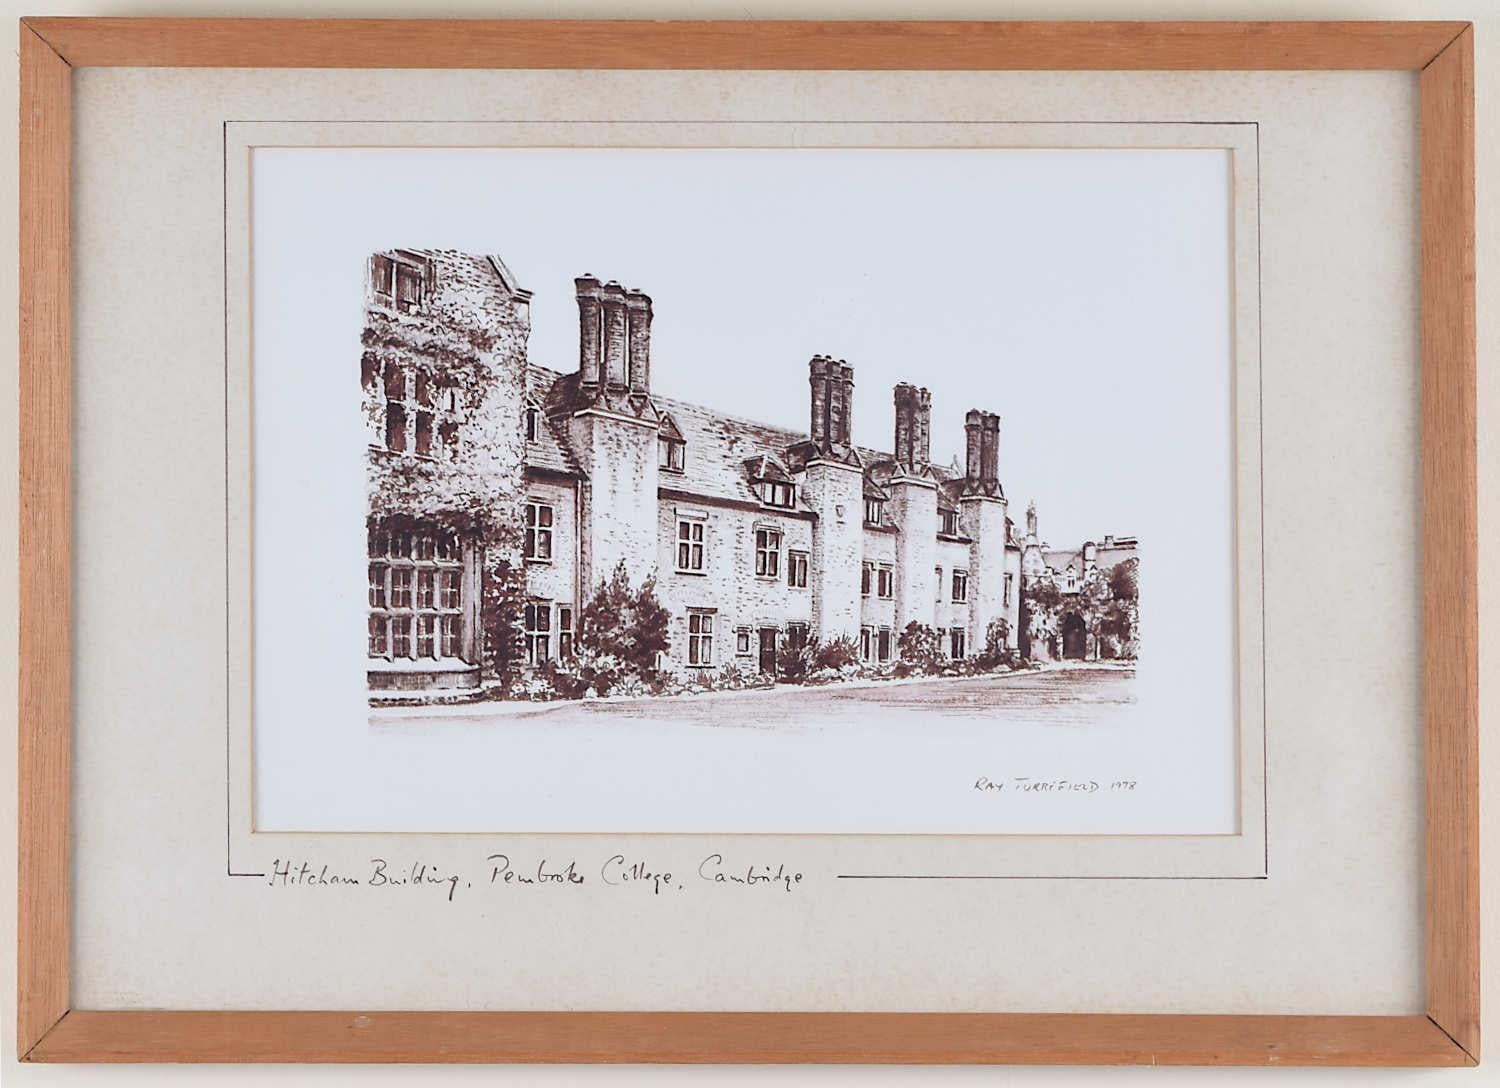 To see our other views of Oxford and Cambridge, scroll down to "More from this Seller" and below it click on "See all from this Seller" - or send us a message if you cannot find the view you want.

Ray Turrefield (active late 20th century)
Hitcham